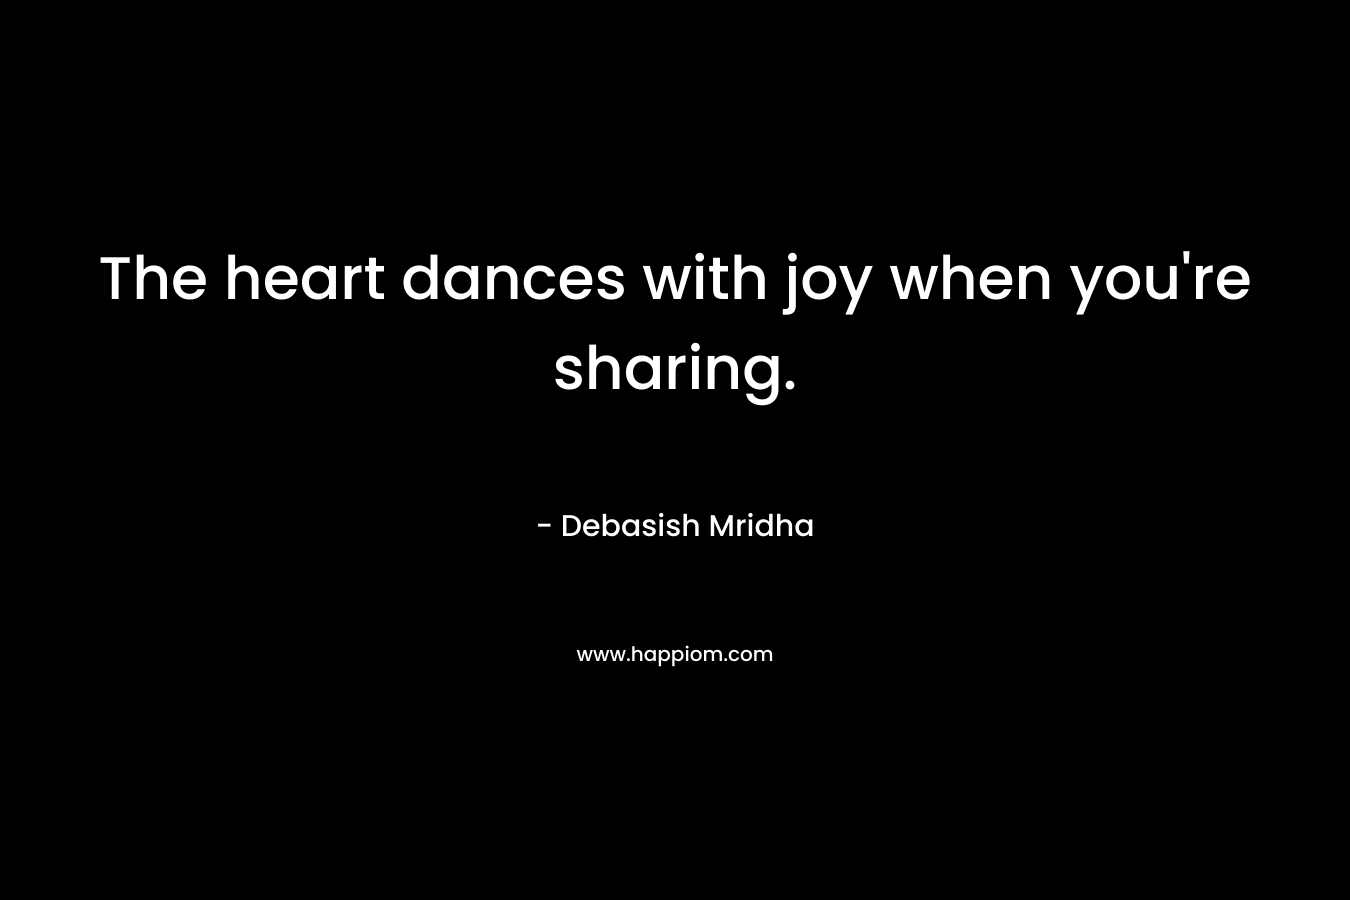 The heart dances with joy when you're sharing.